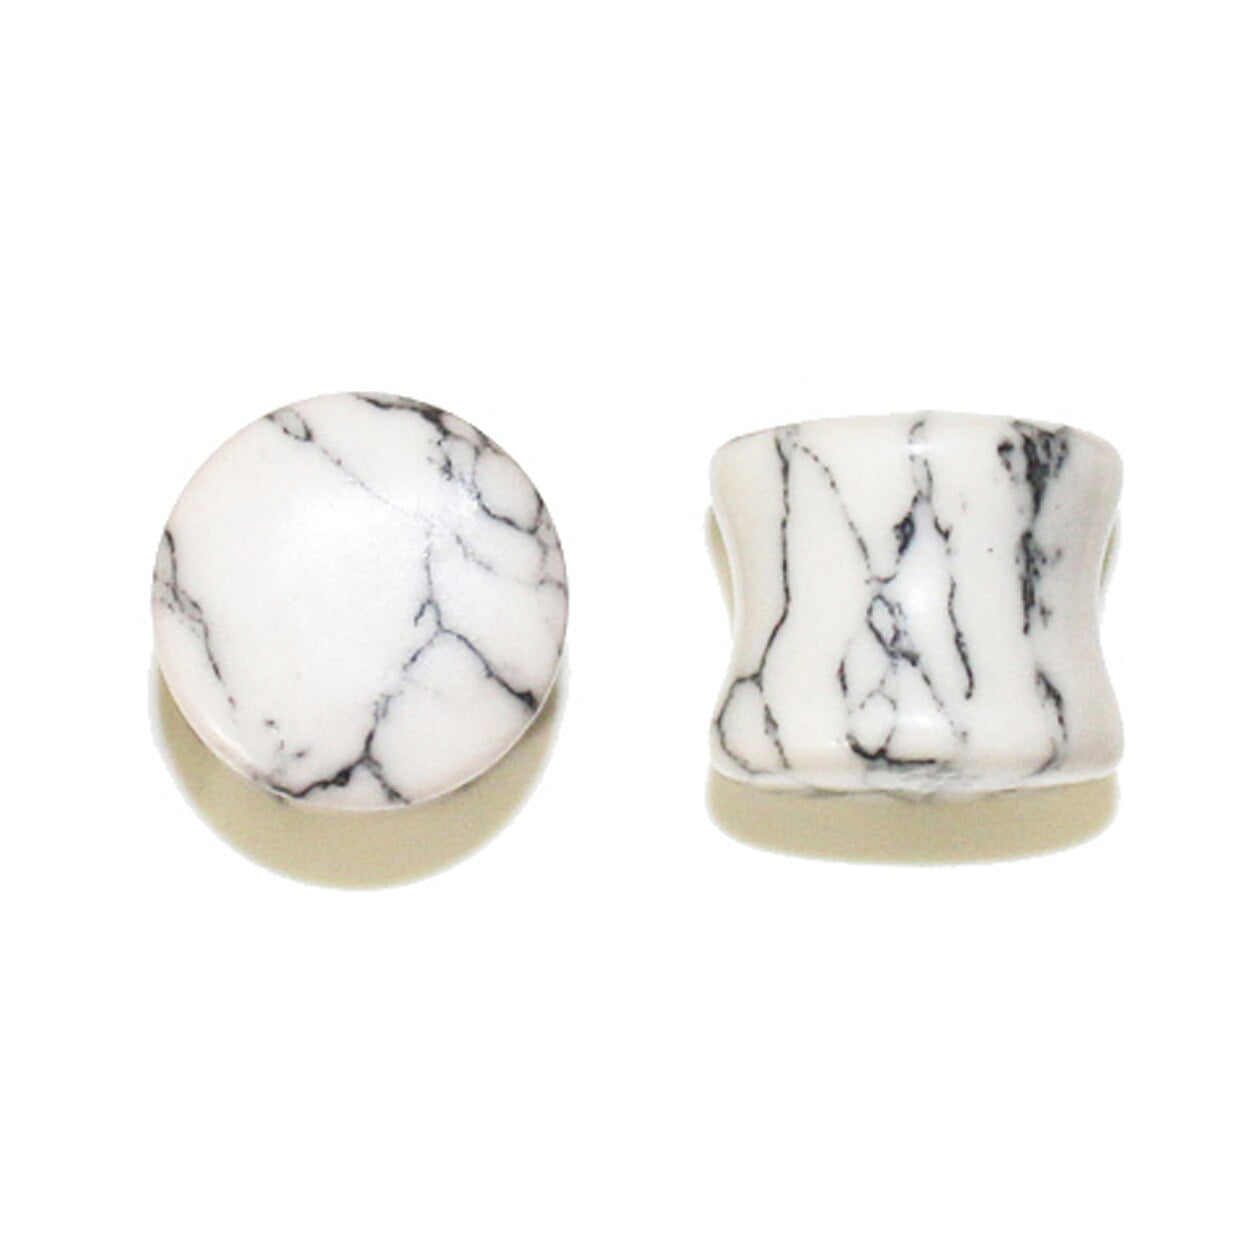 Price Per 1 1" GREEN MARBLE Stone Double Flare Plugs 10g 